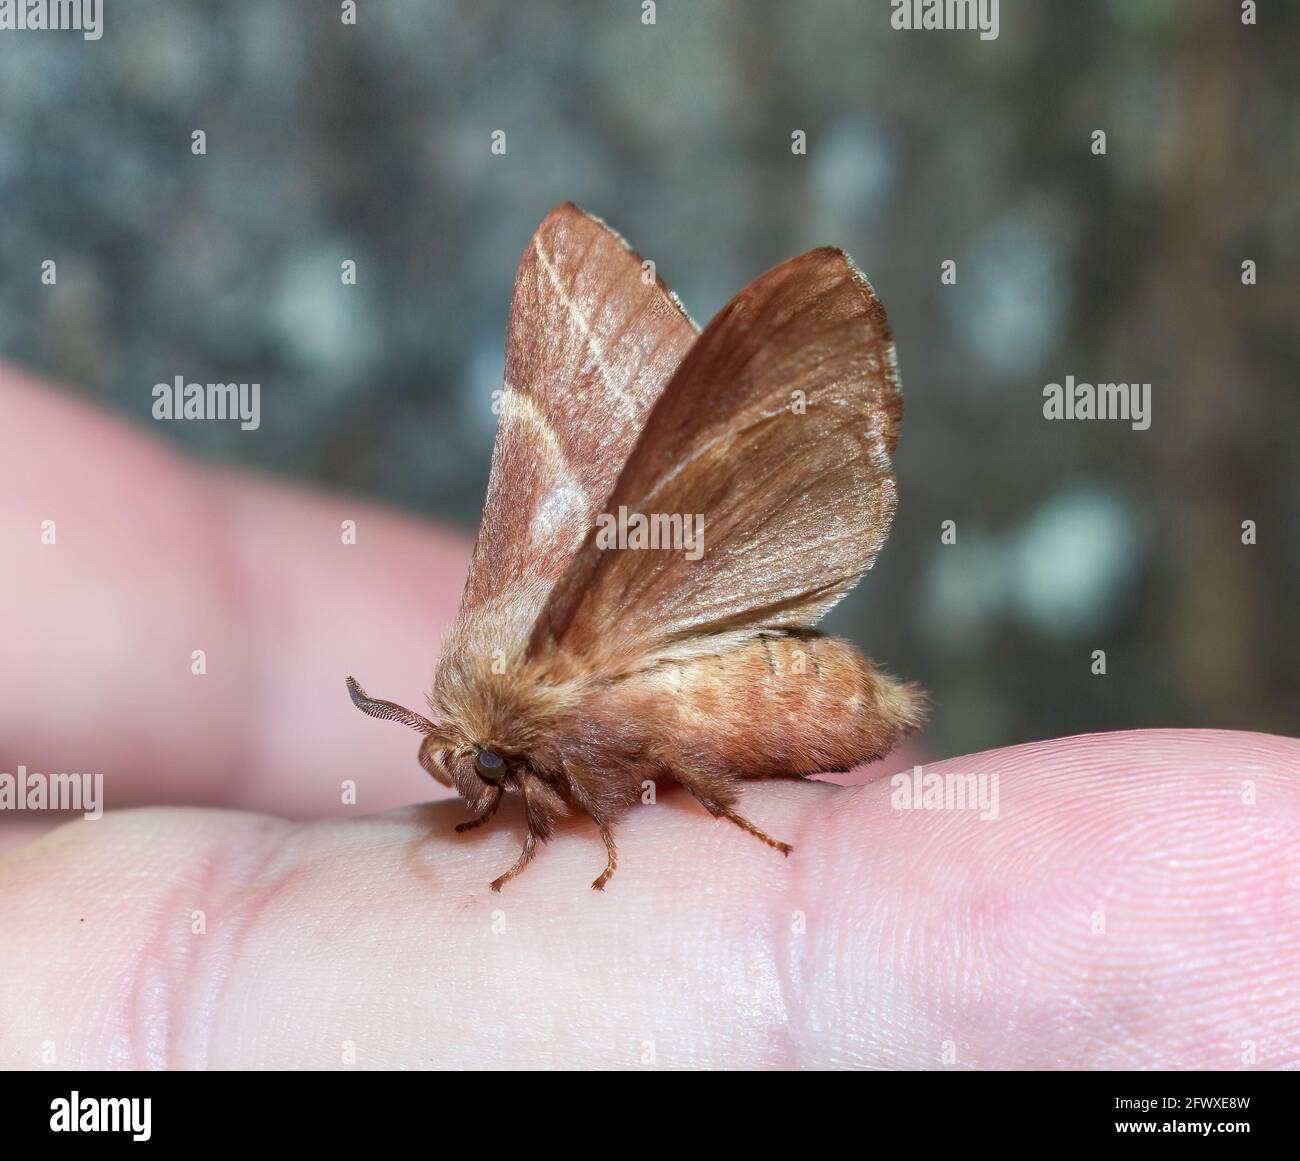 Eastern tent moth (Malacosoma americanum) on finger side view, wings up legs  body and antennae showing - reddish color -human interaction with harmles  Stock Photo - Alamy